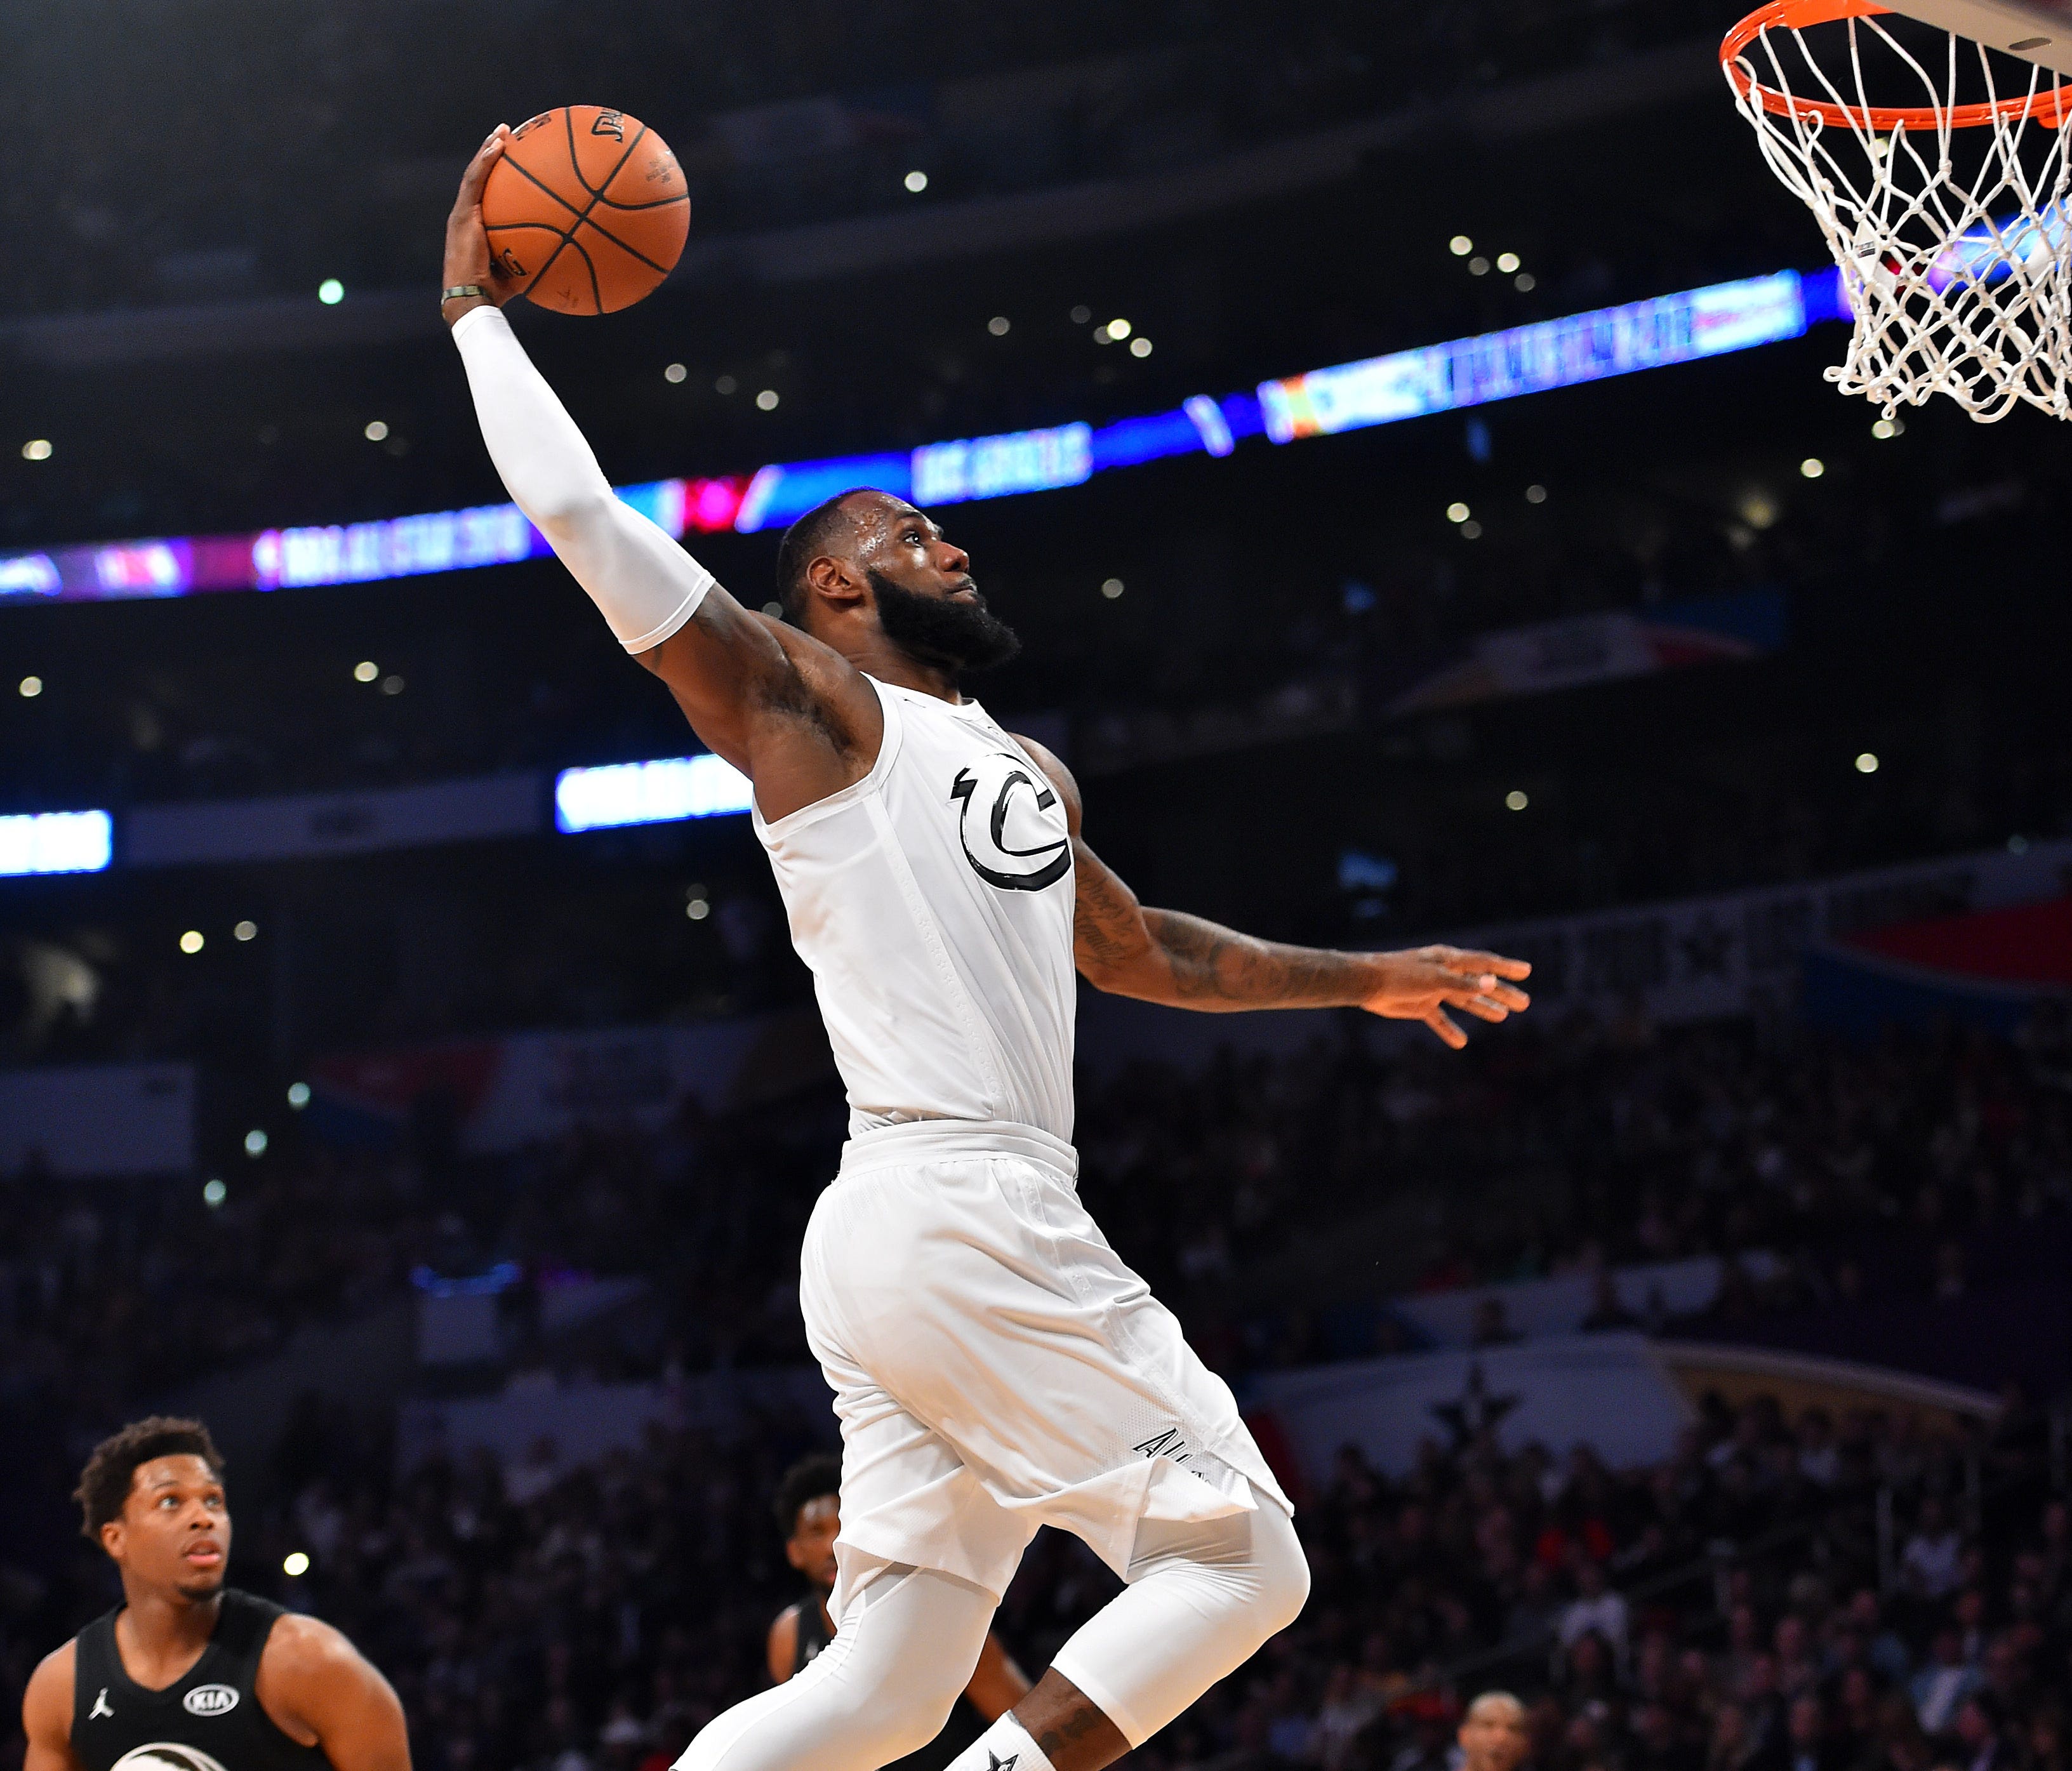 LeBron James goes up for a dunk during the All-Star Game.